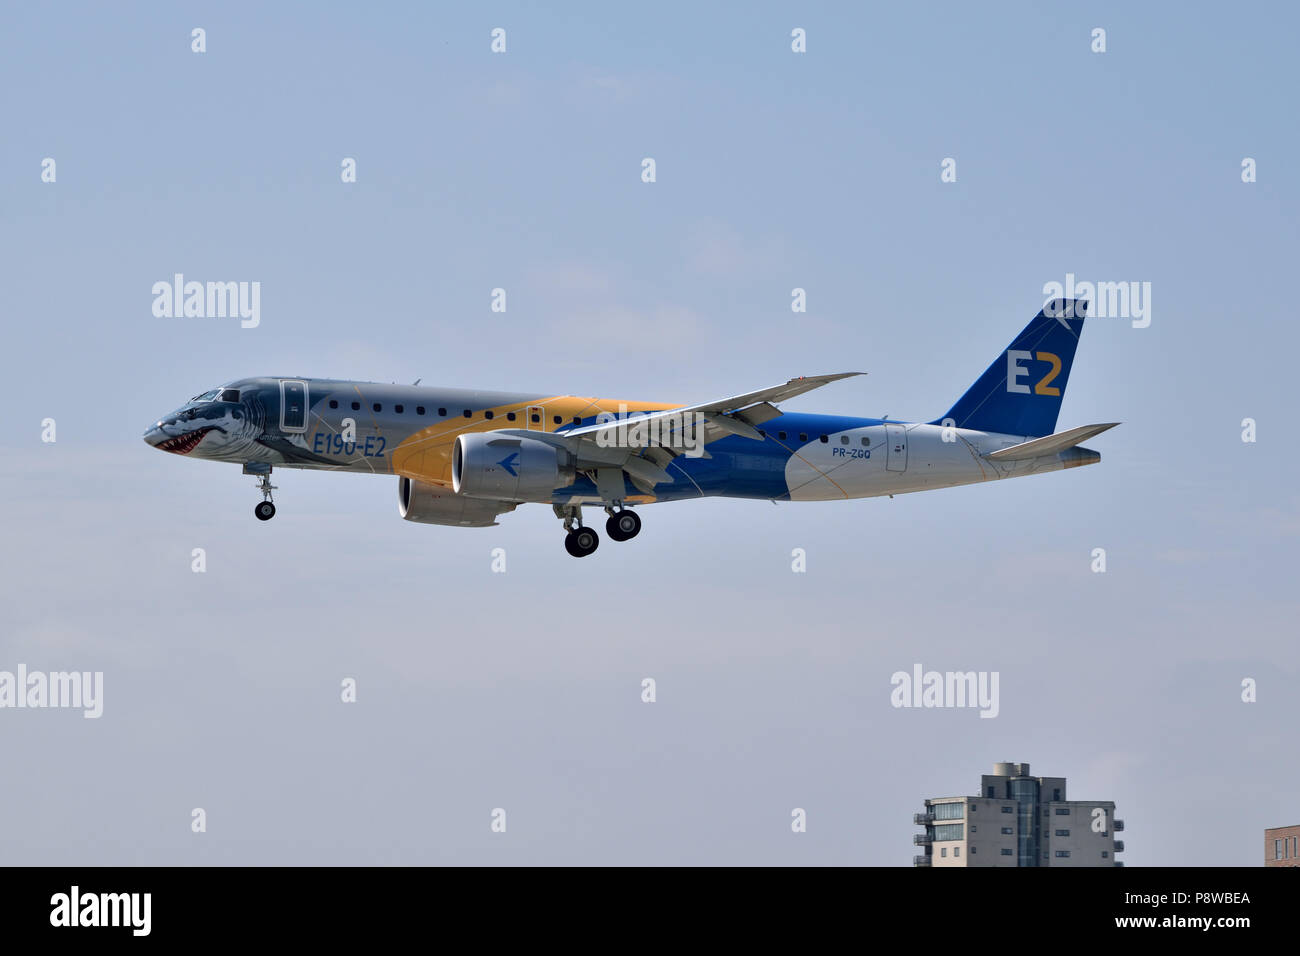 The all new Embraer E190 E2 medium range jet airliner makes its maiden arrival to London City Airport located in London’s Royal Docks Stock Photo